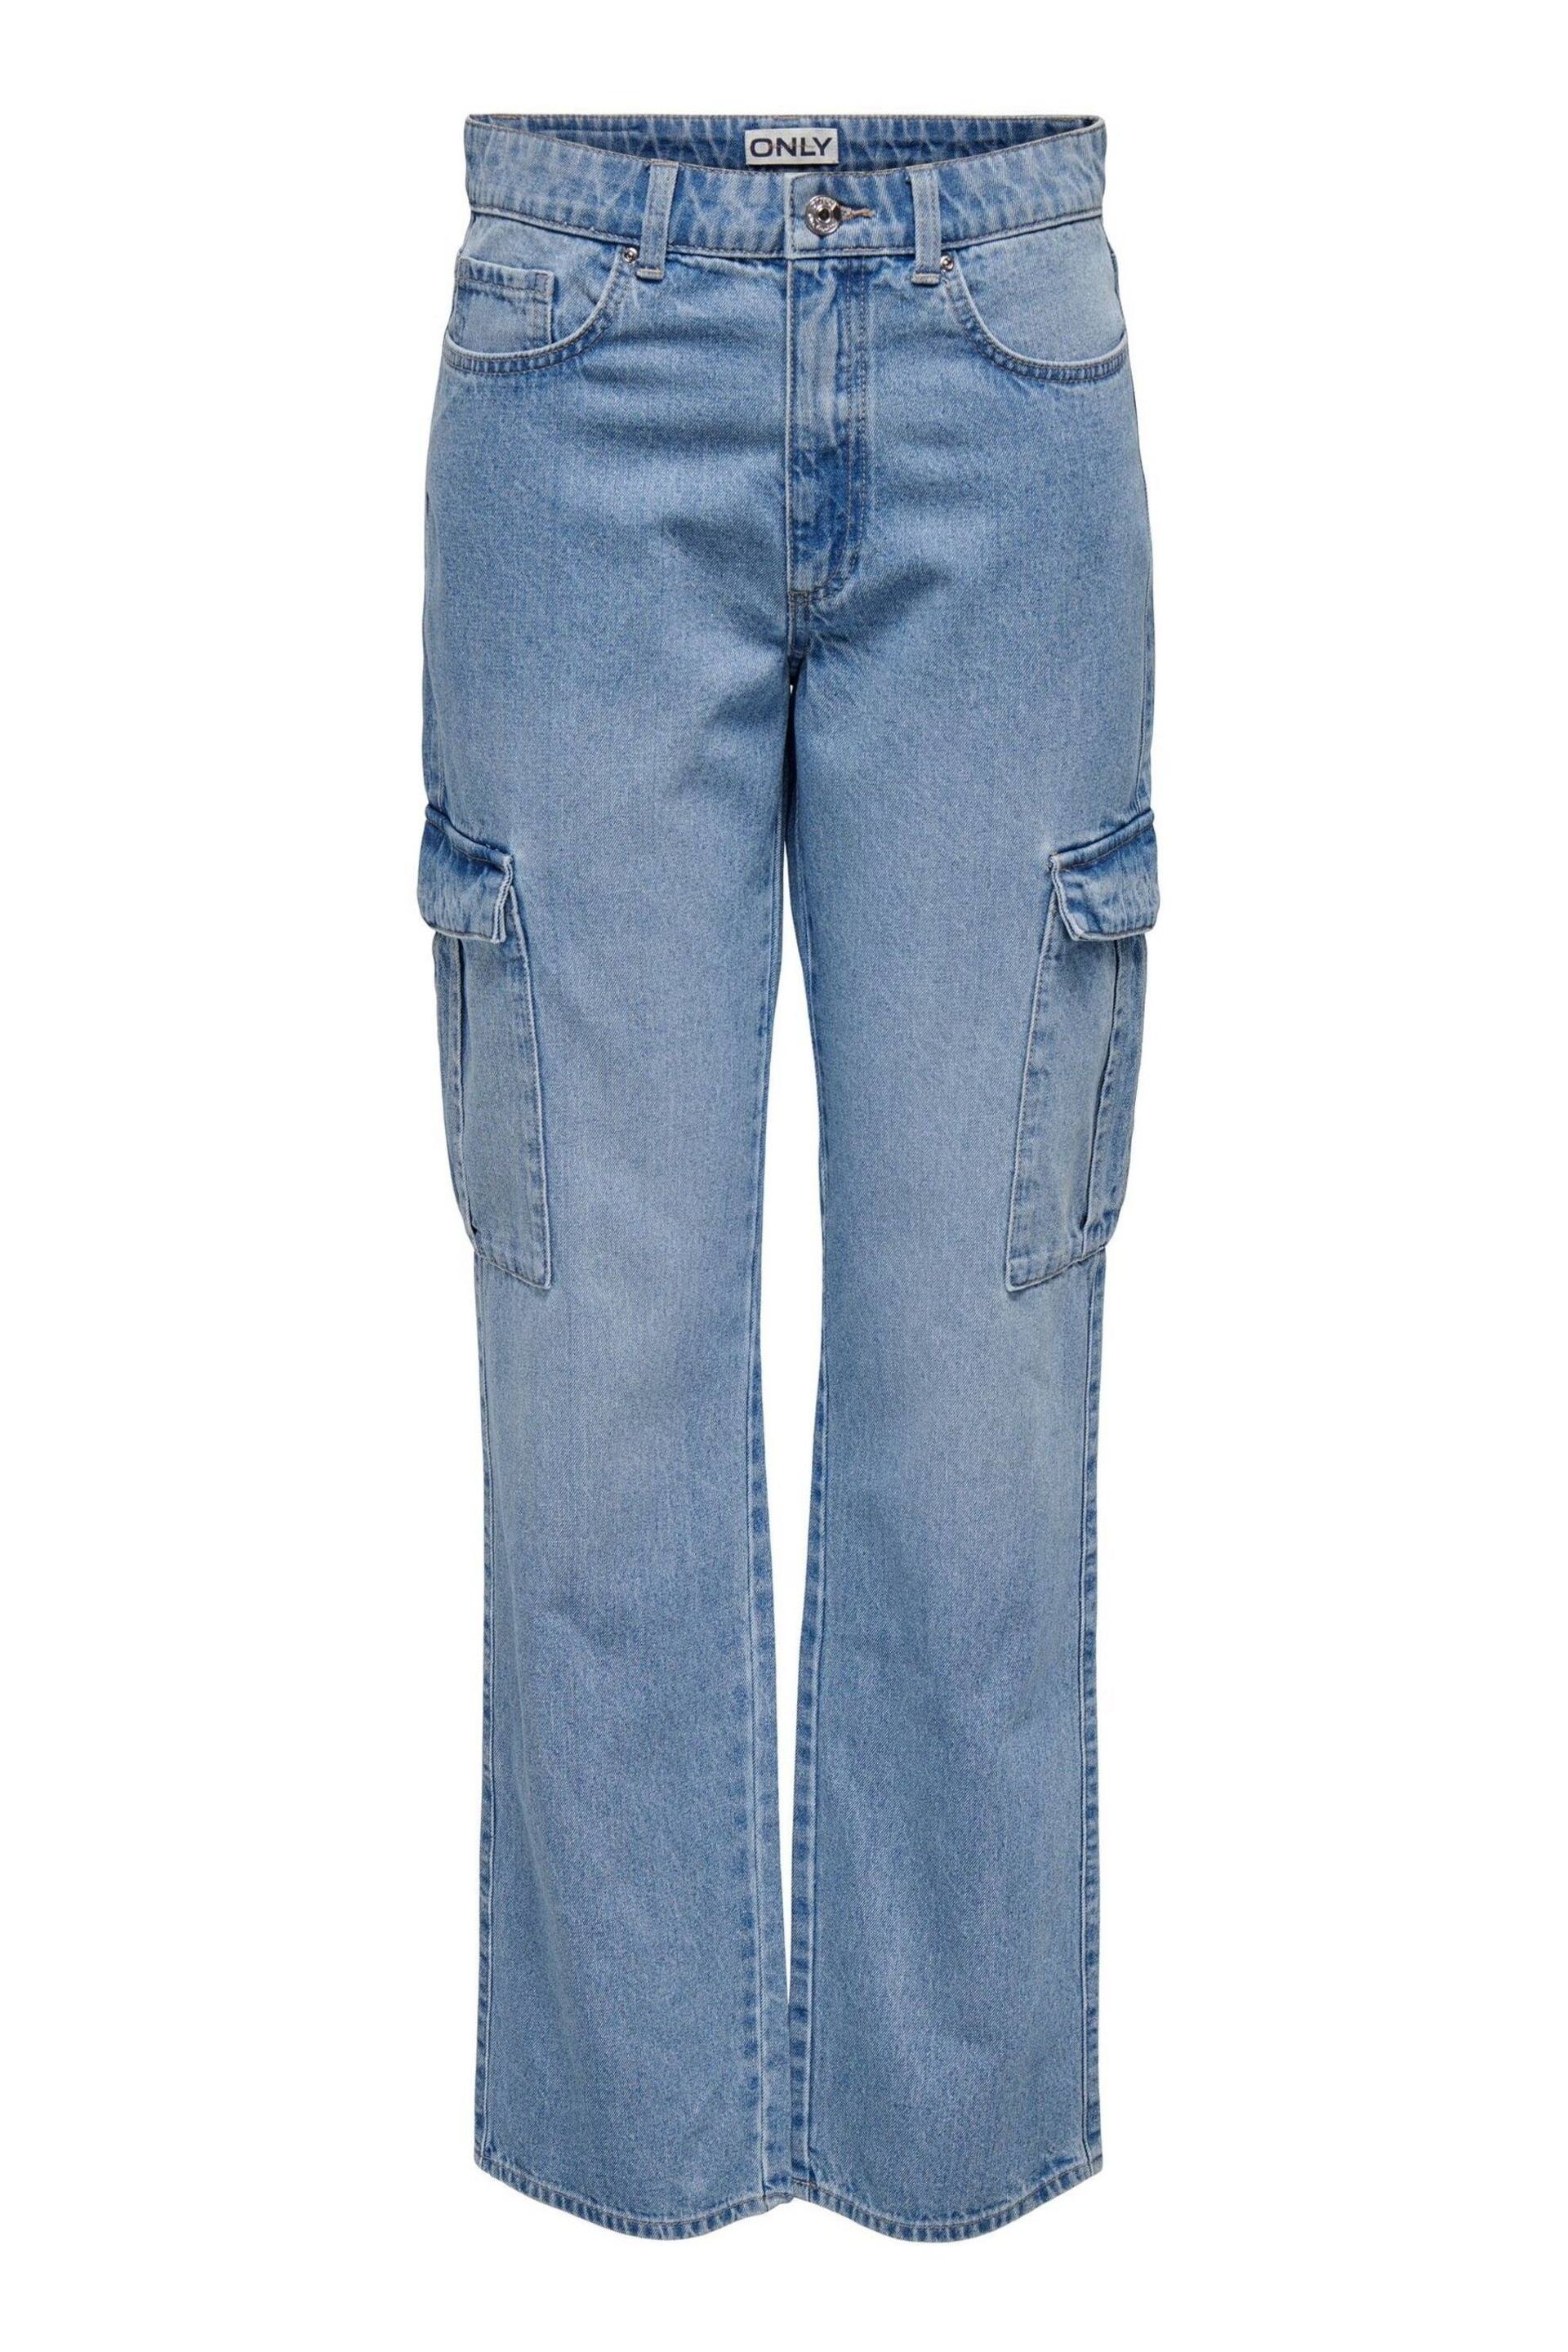 ONLY Blue Utility Cargo Straight Leg Jeans - Image 7 of 7